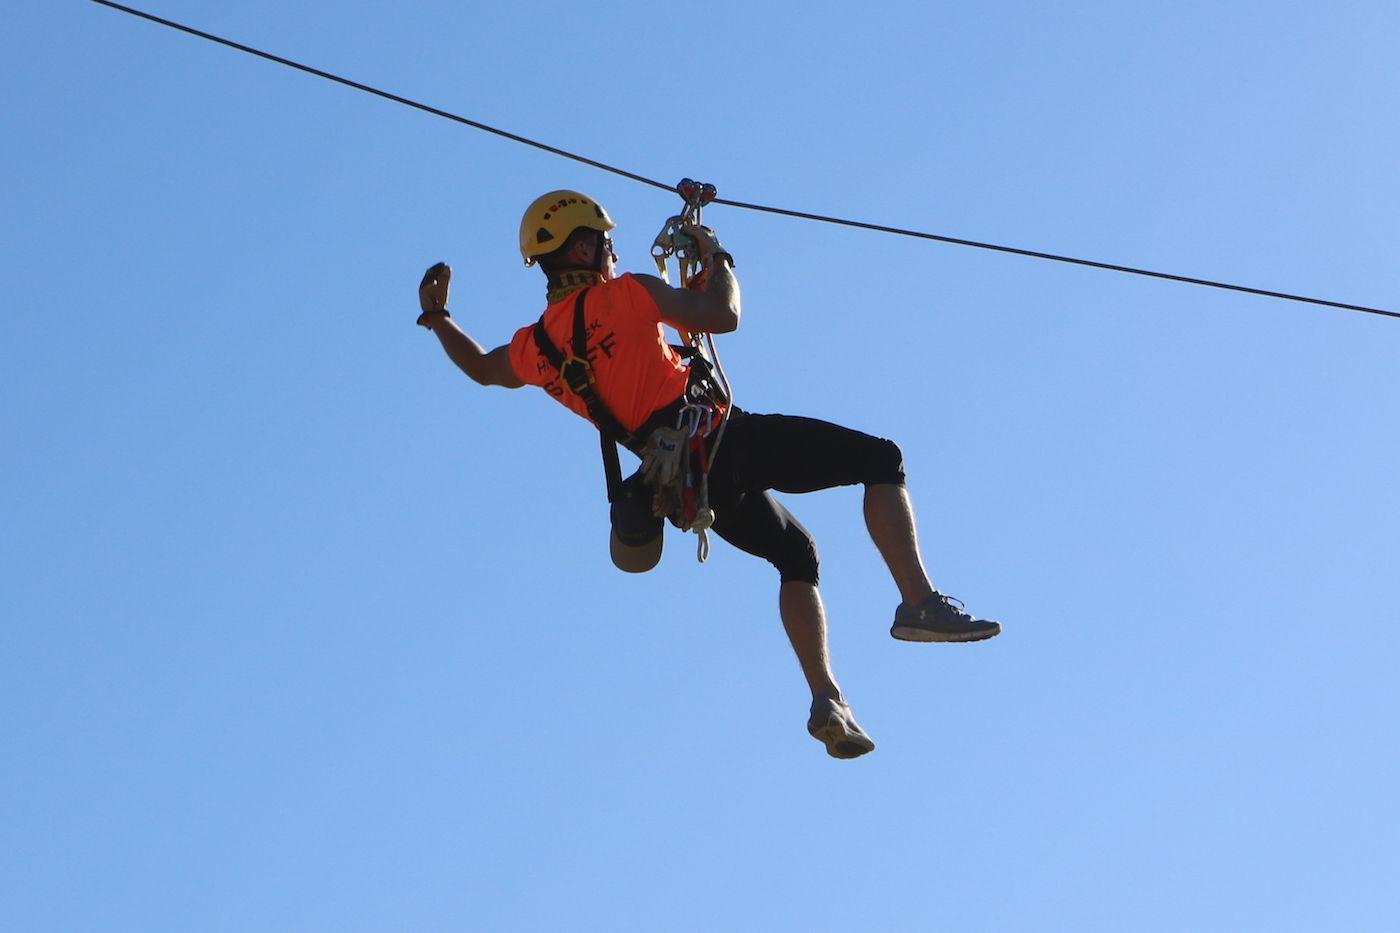 High Trek Adventures: Ropes Course & Zipline For Ages 4 104